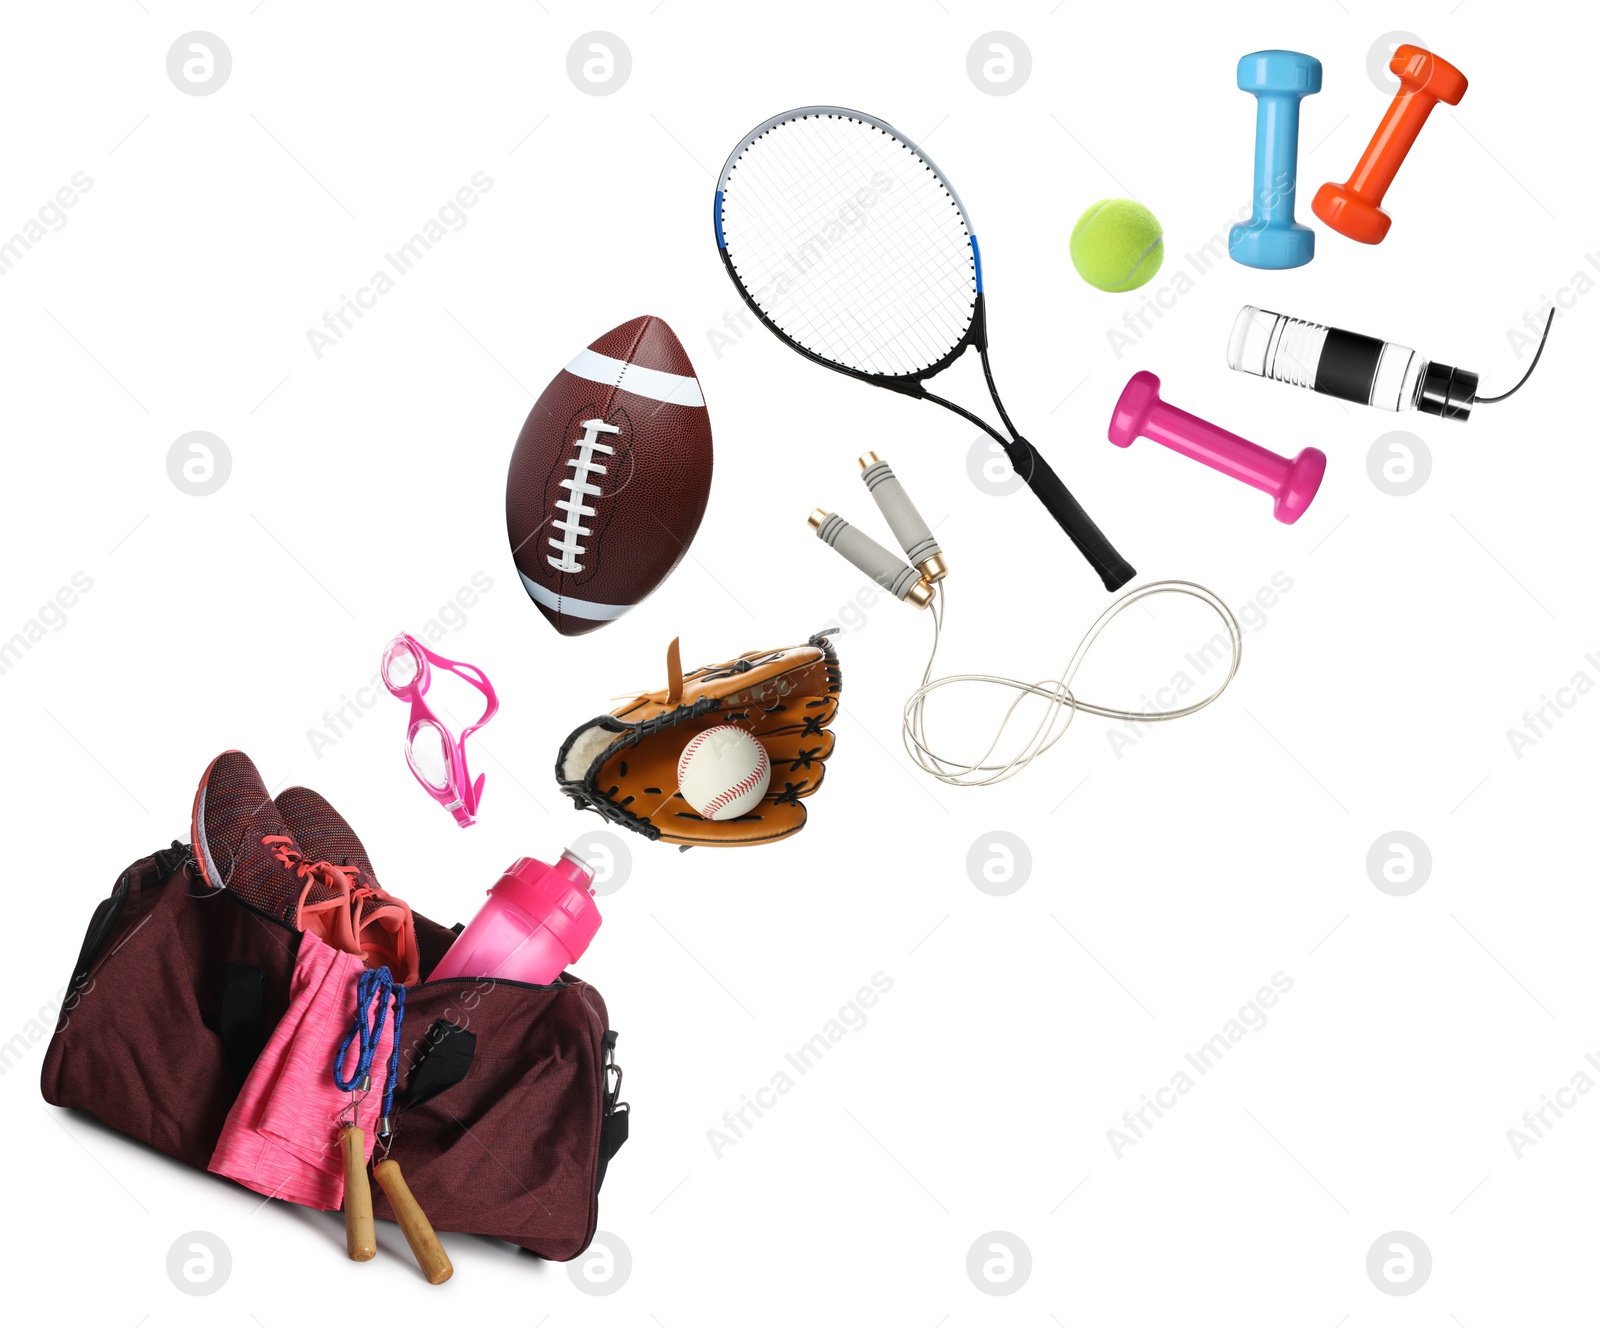 Image of Sports bag and different gym stuff flying on white background